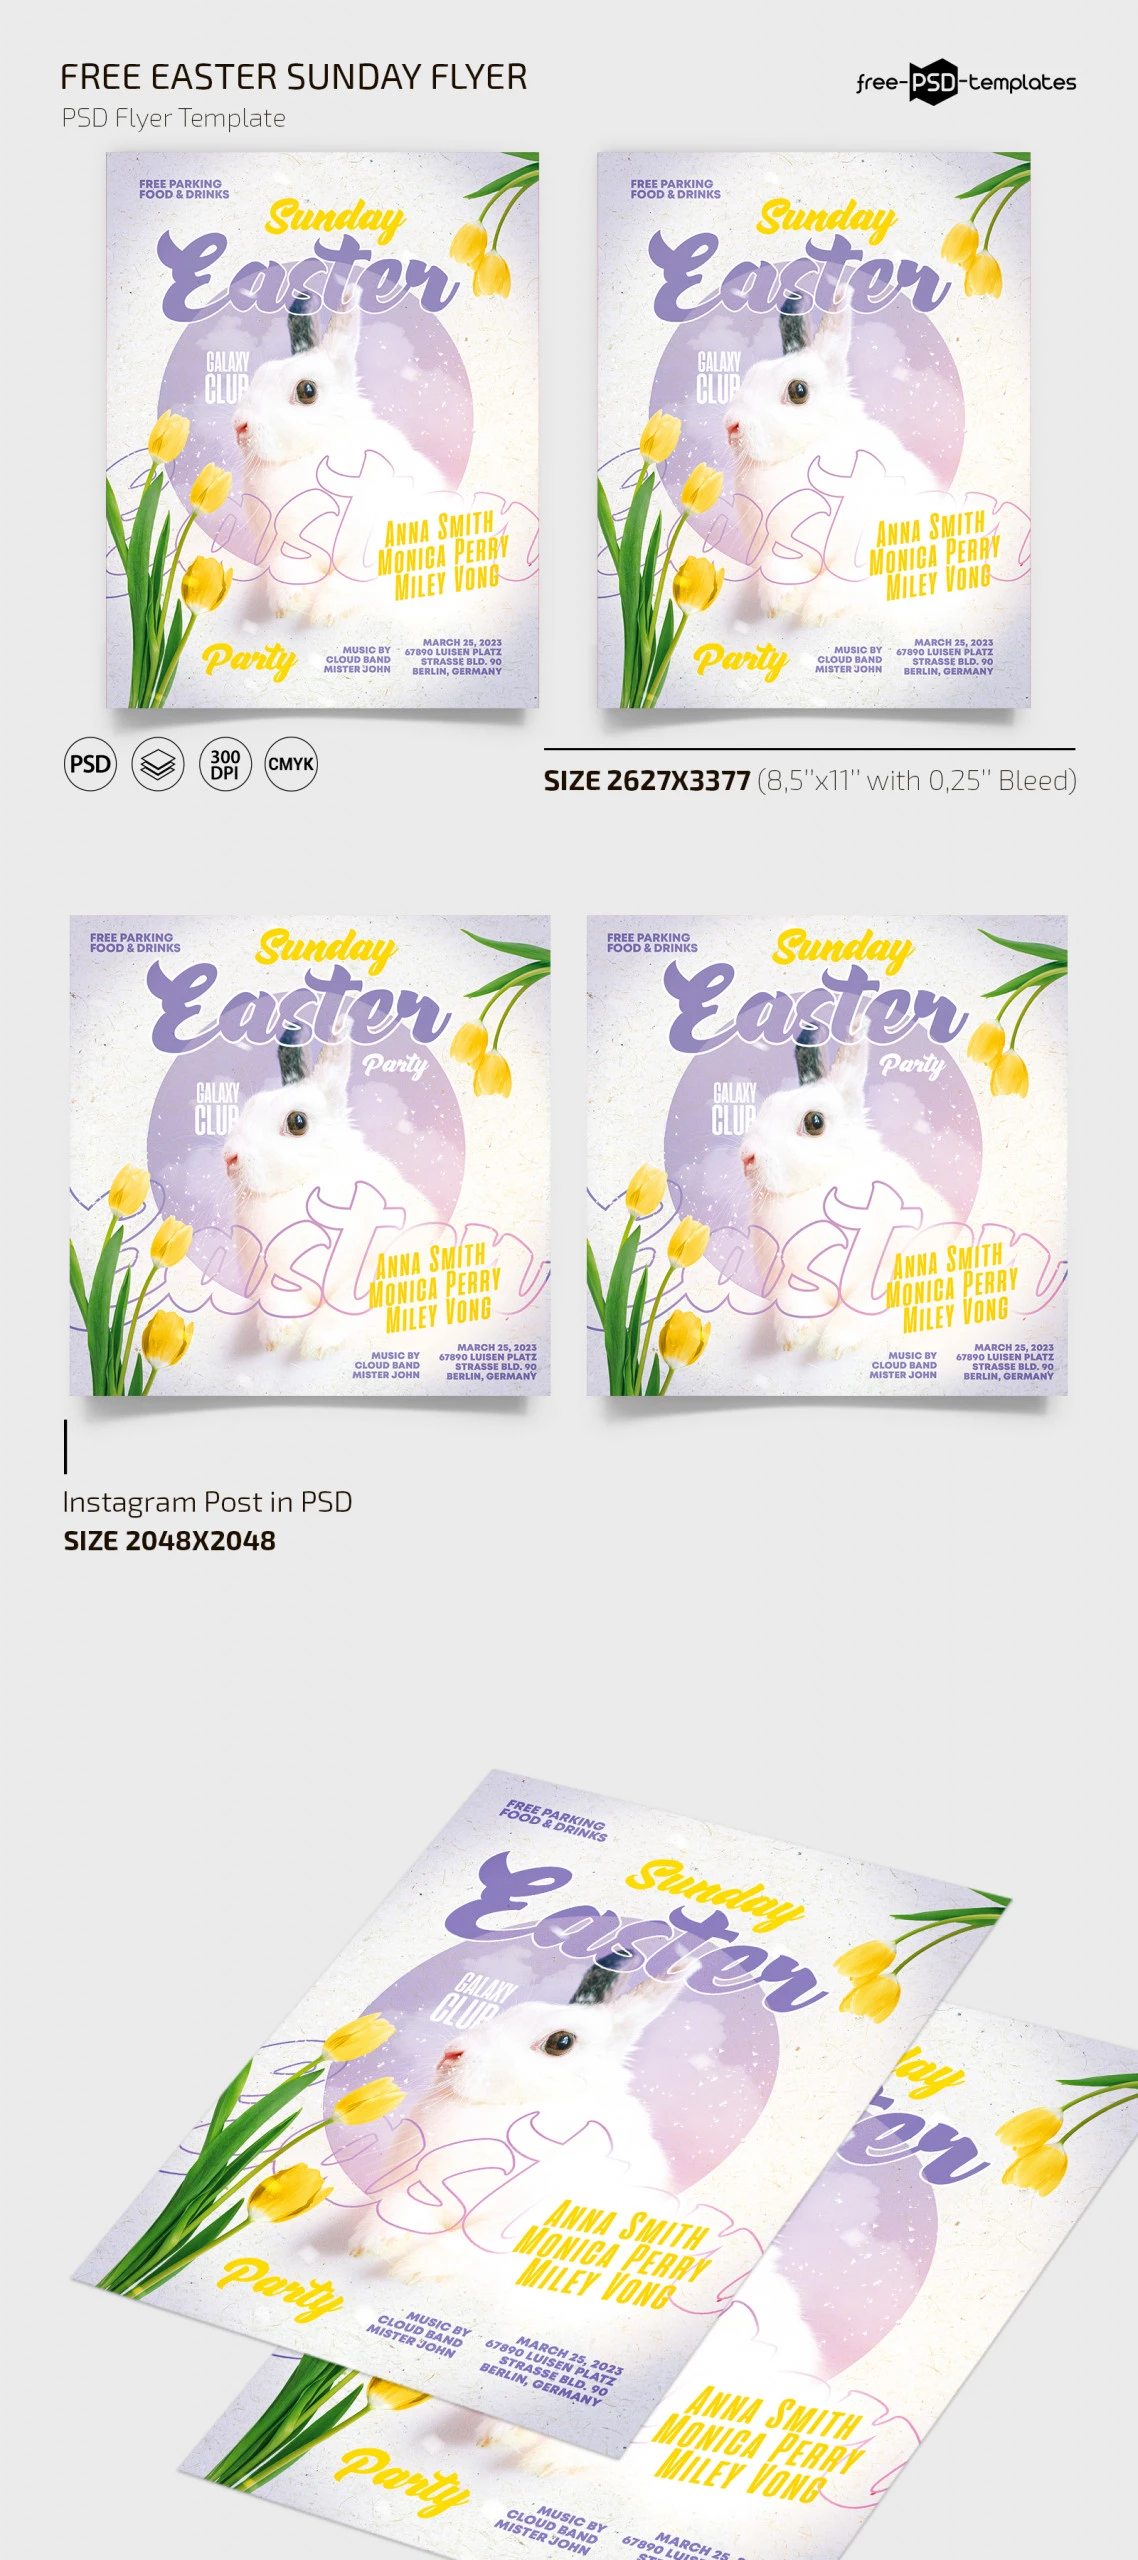 Free Easter Sunday Flyer Template + Instagram Post (PSD)